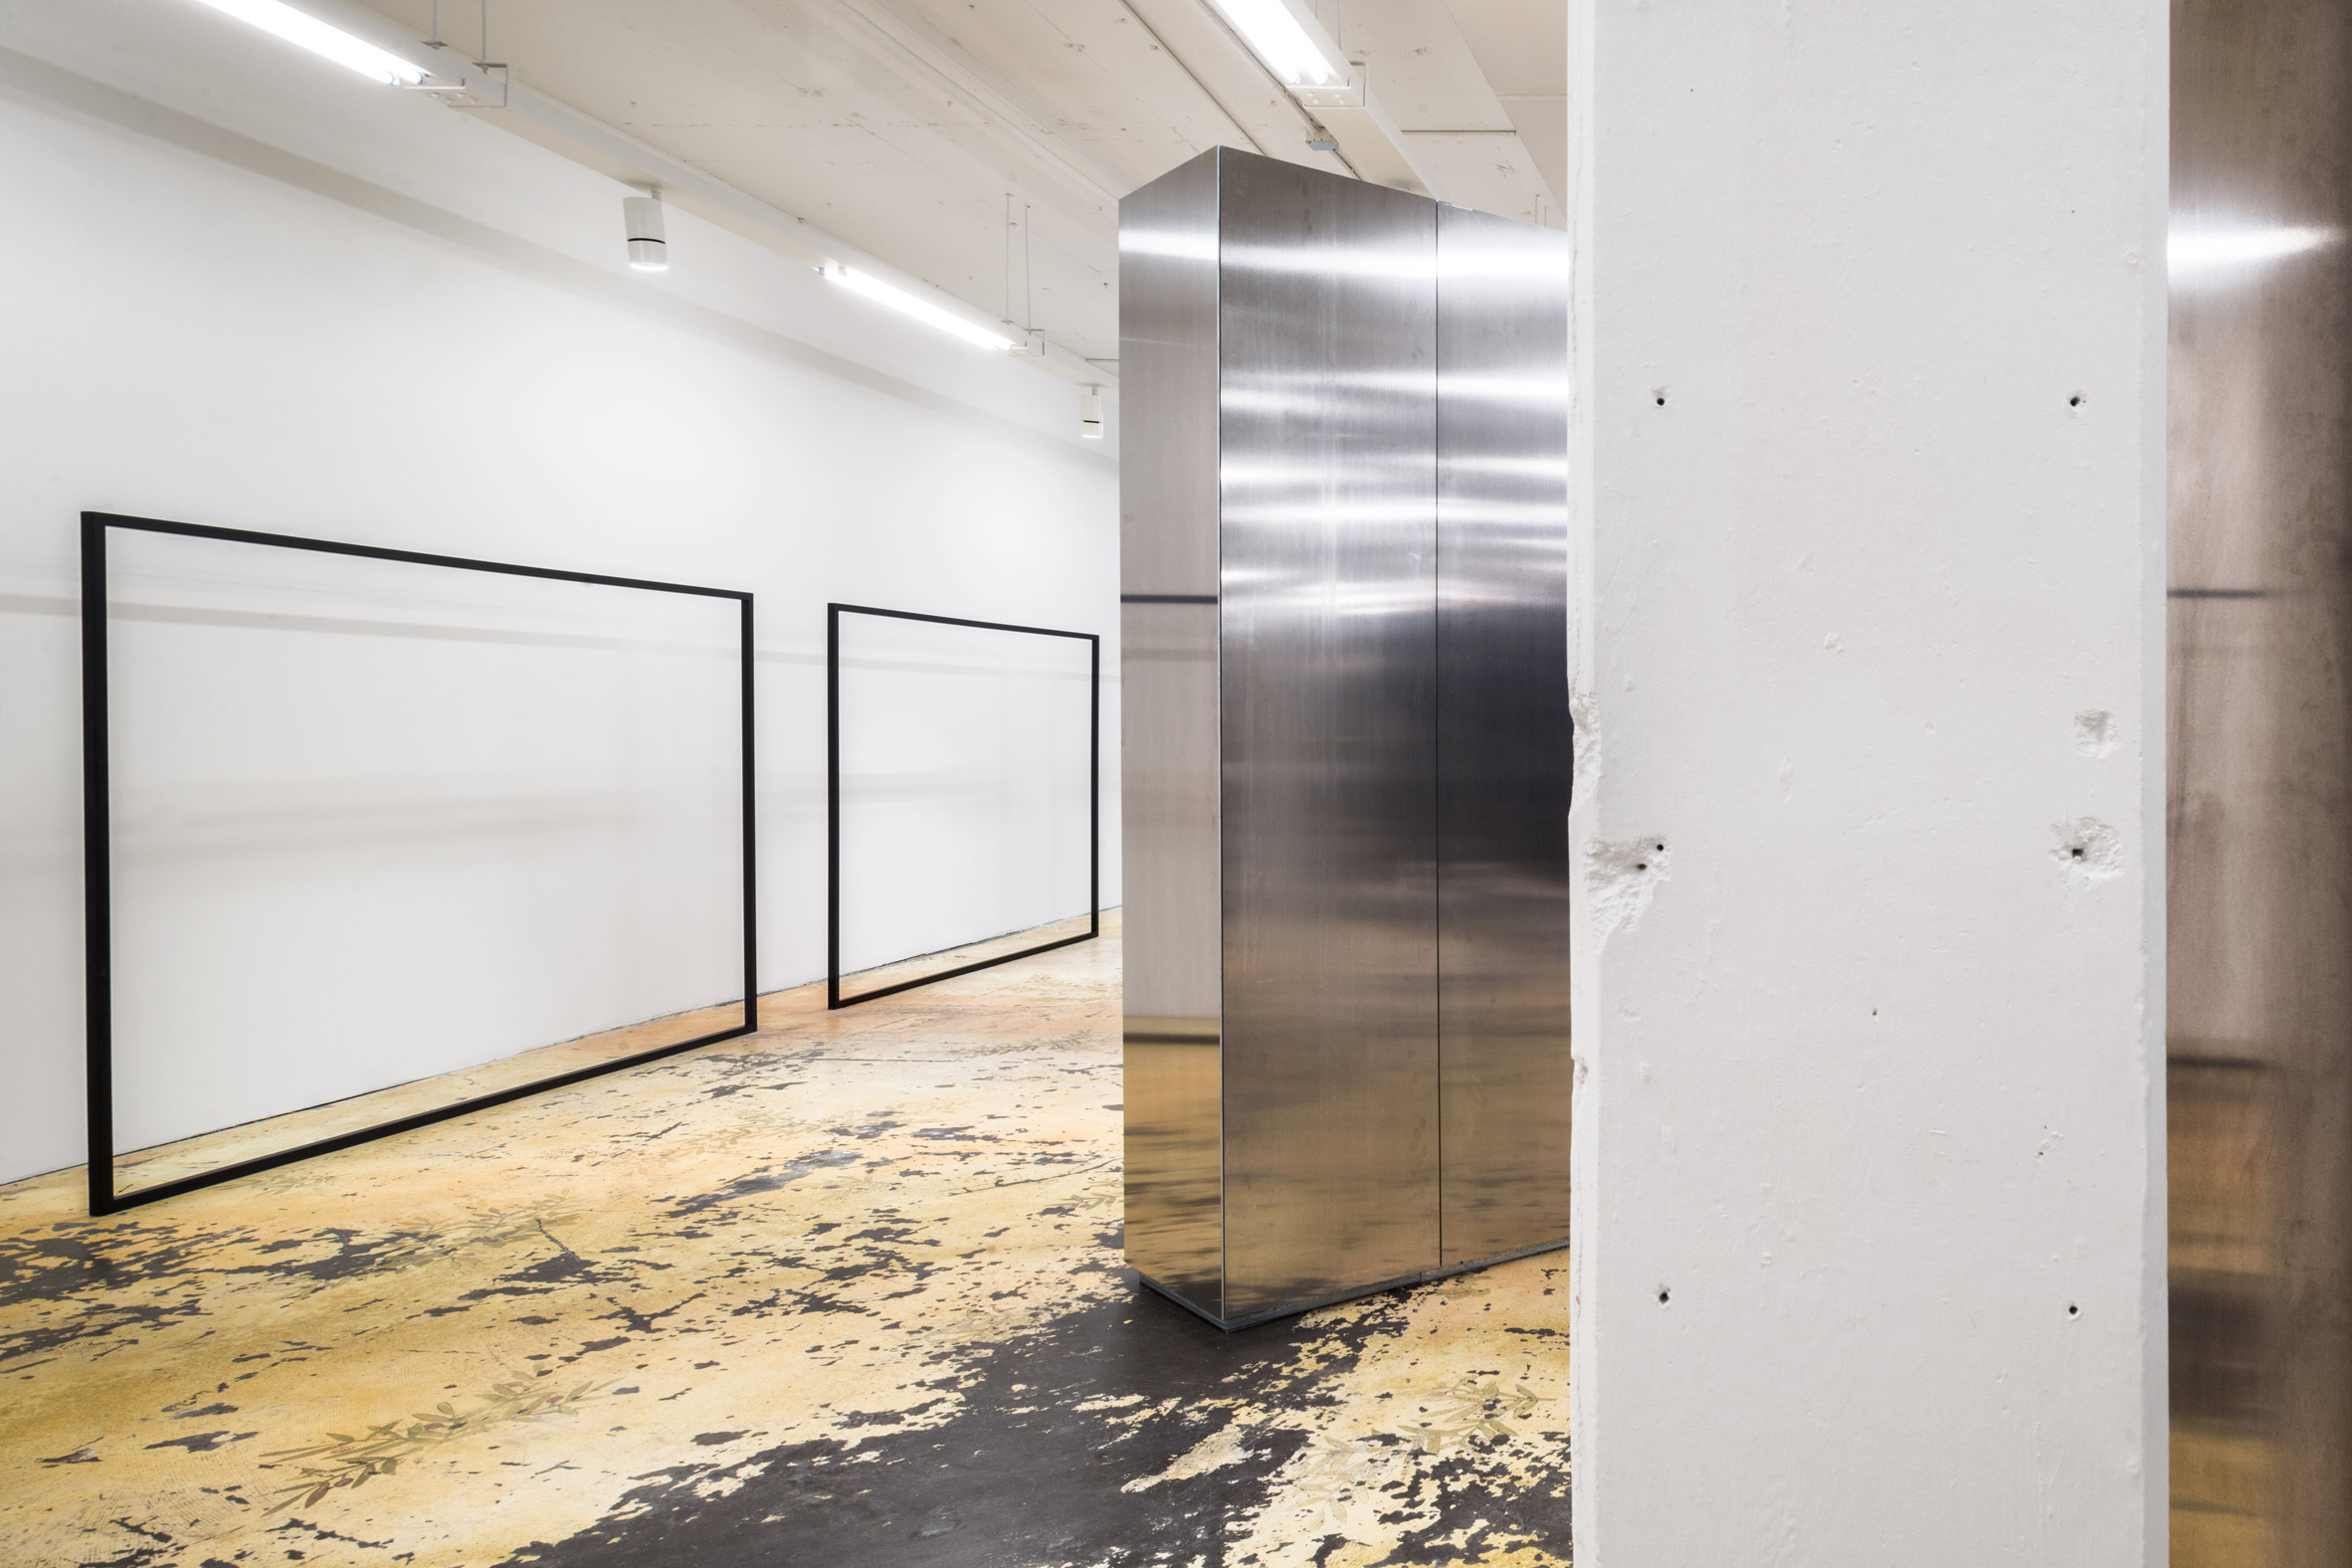 Casper Mueller Kneer transforms Vancouver warehouse into fashion store with metallic walls